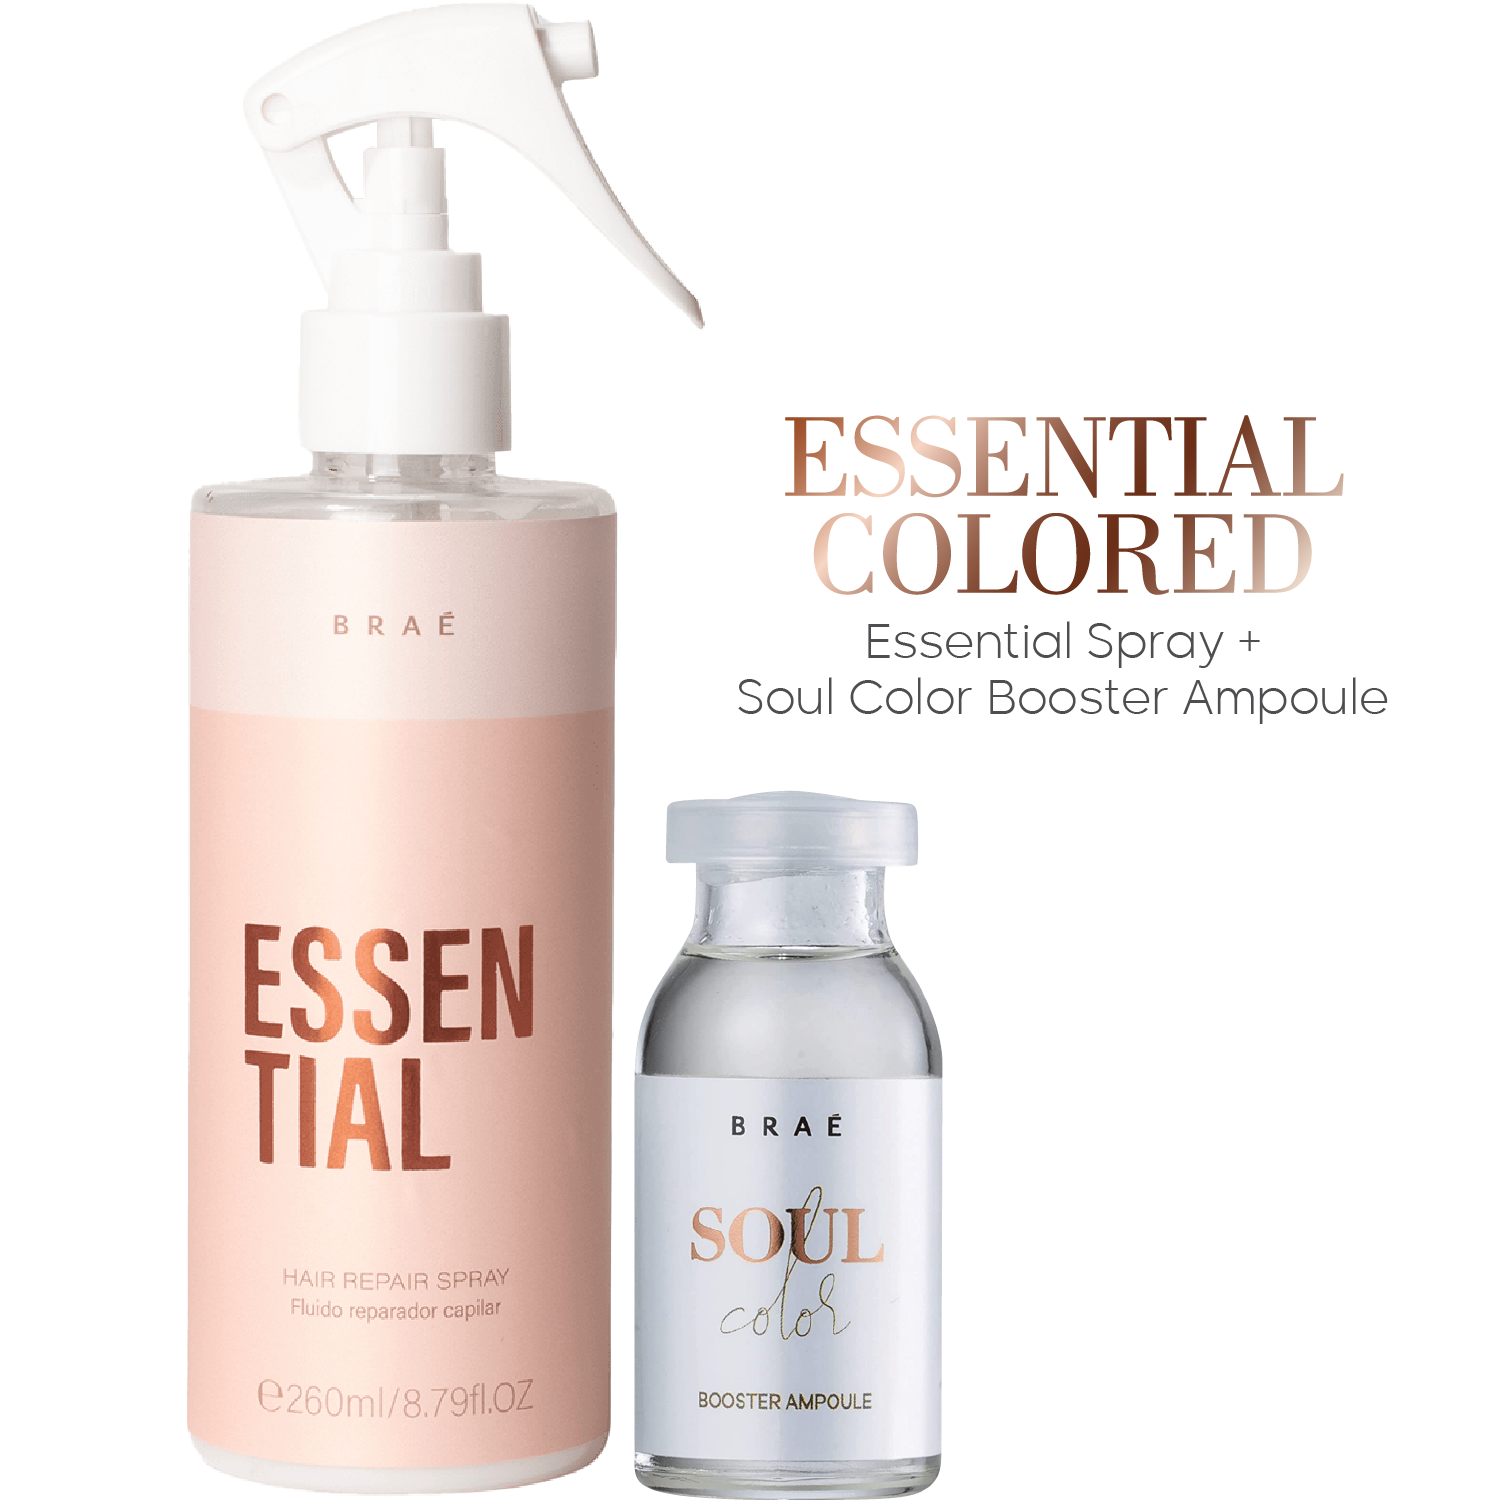 Essential Colored: Essential hair Repair Spray + Soul Color Booster Ampoule